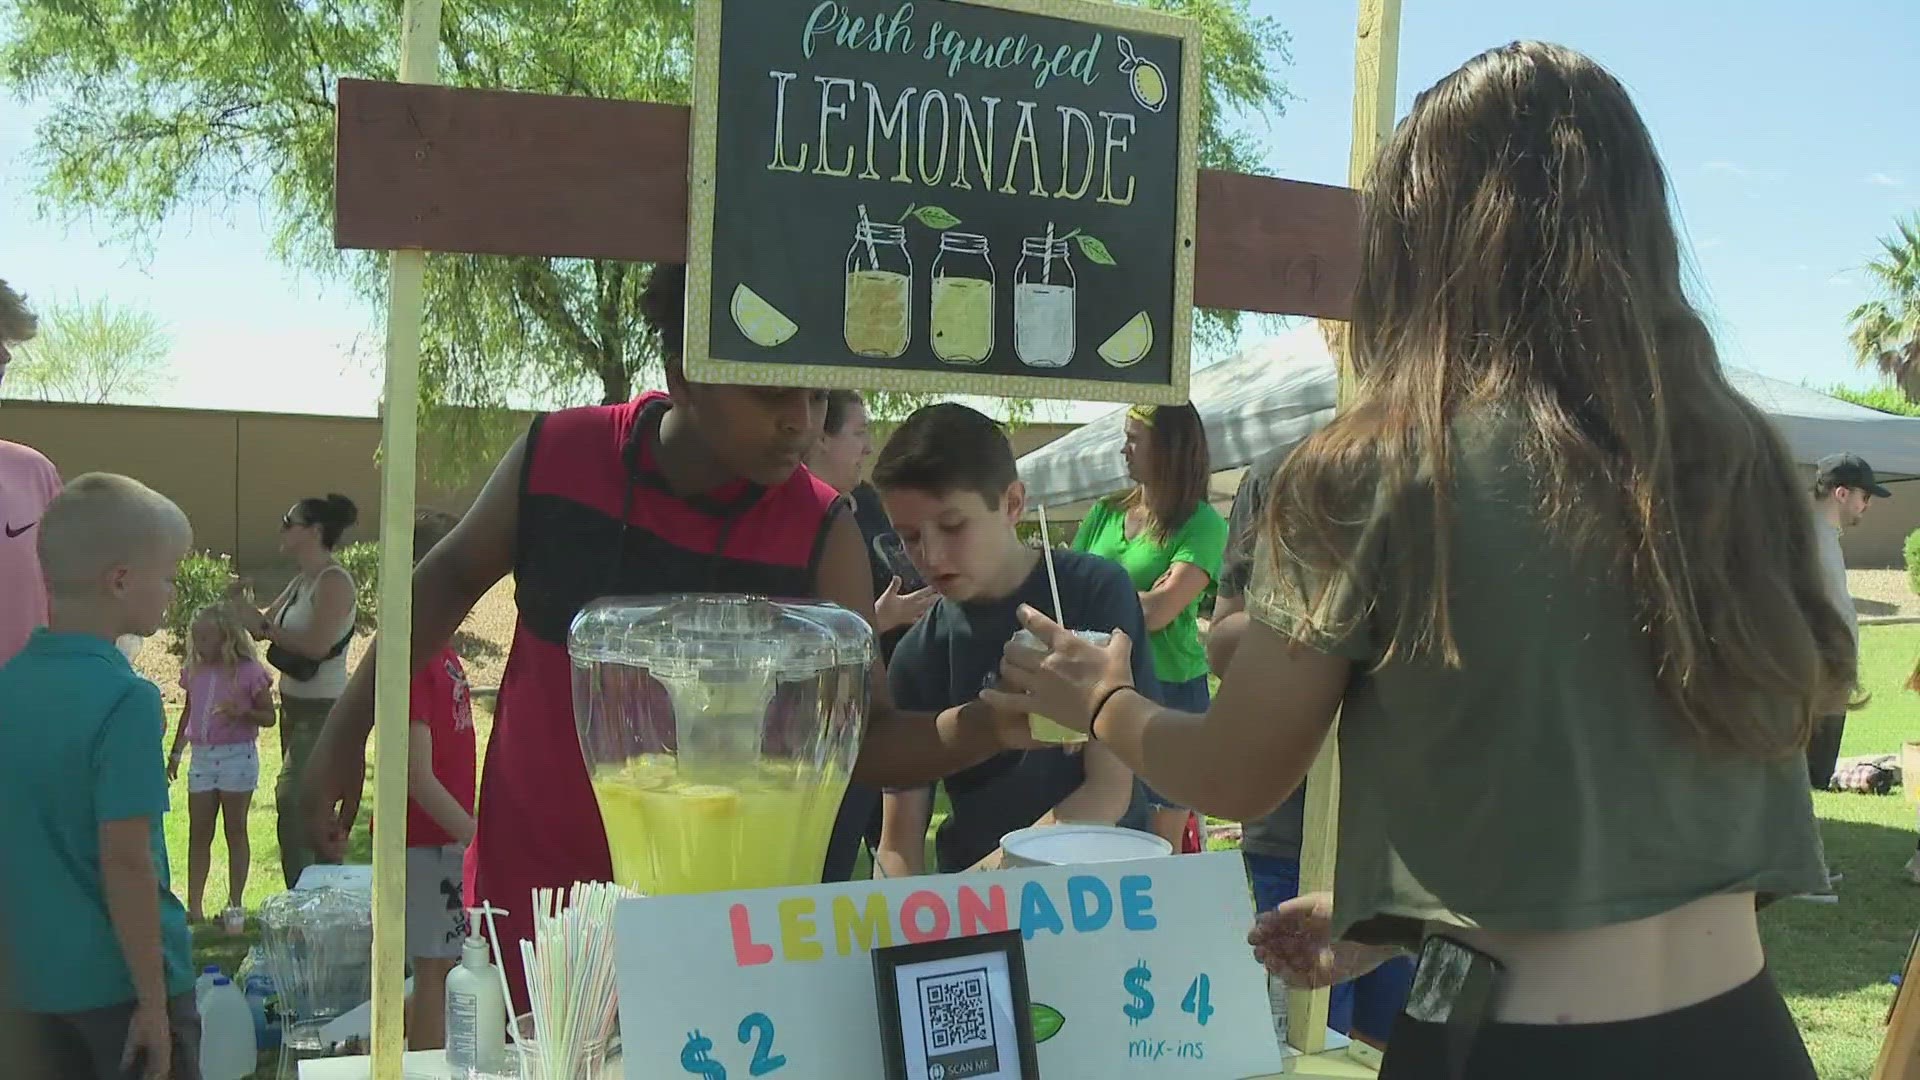 On Saturday kids in the Valley hosted a lemonade stand to raise money for a cure for retinitis pigmentosa, a rare eye disease, in support of a friend who has it